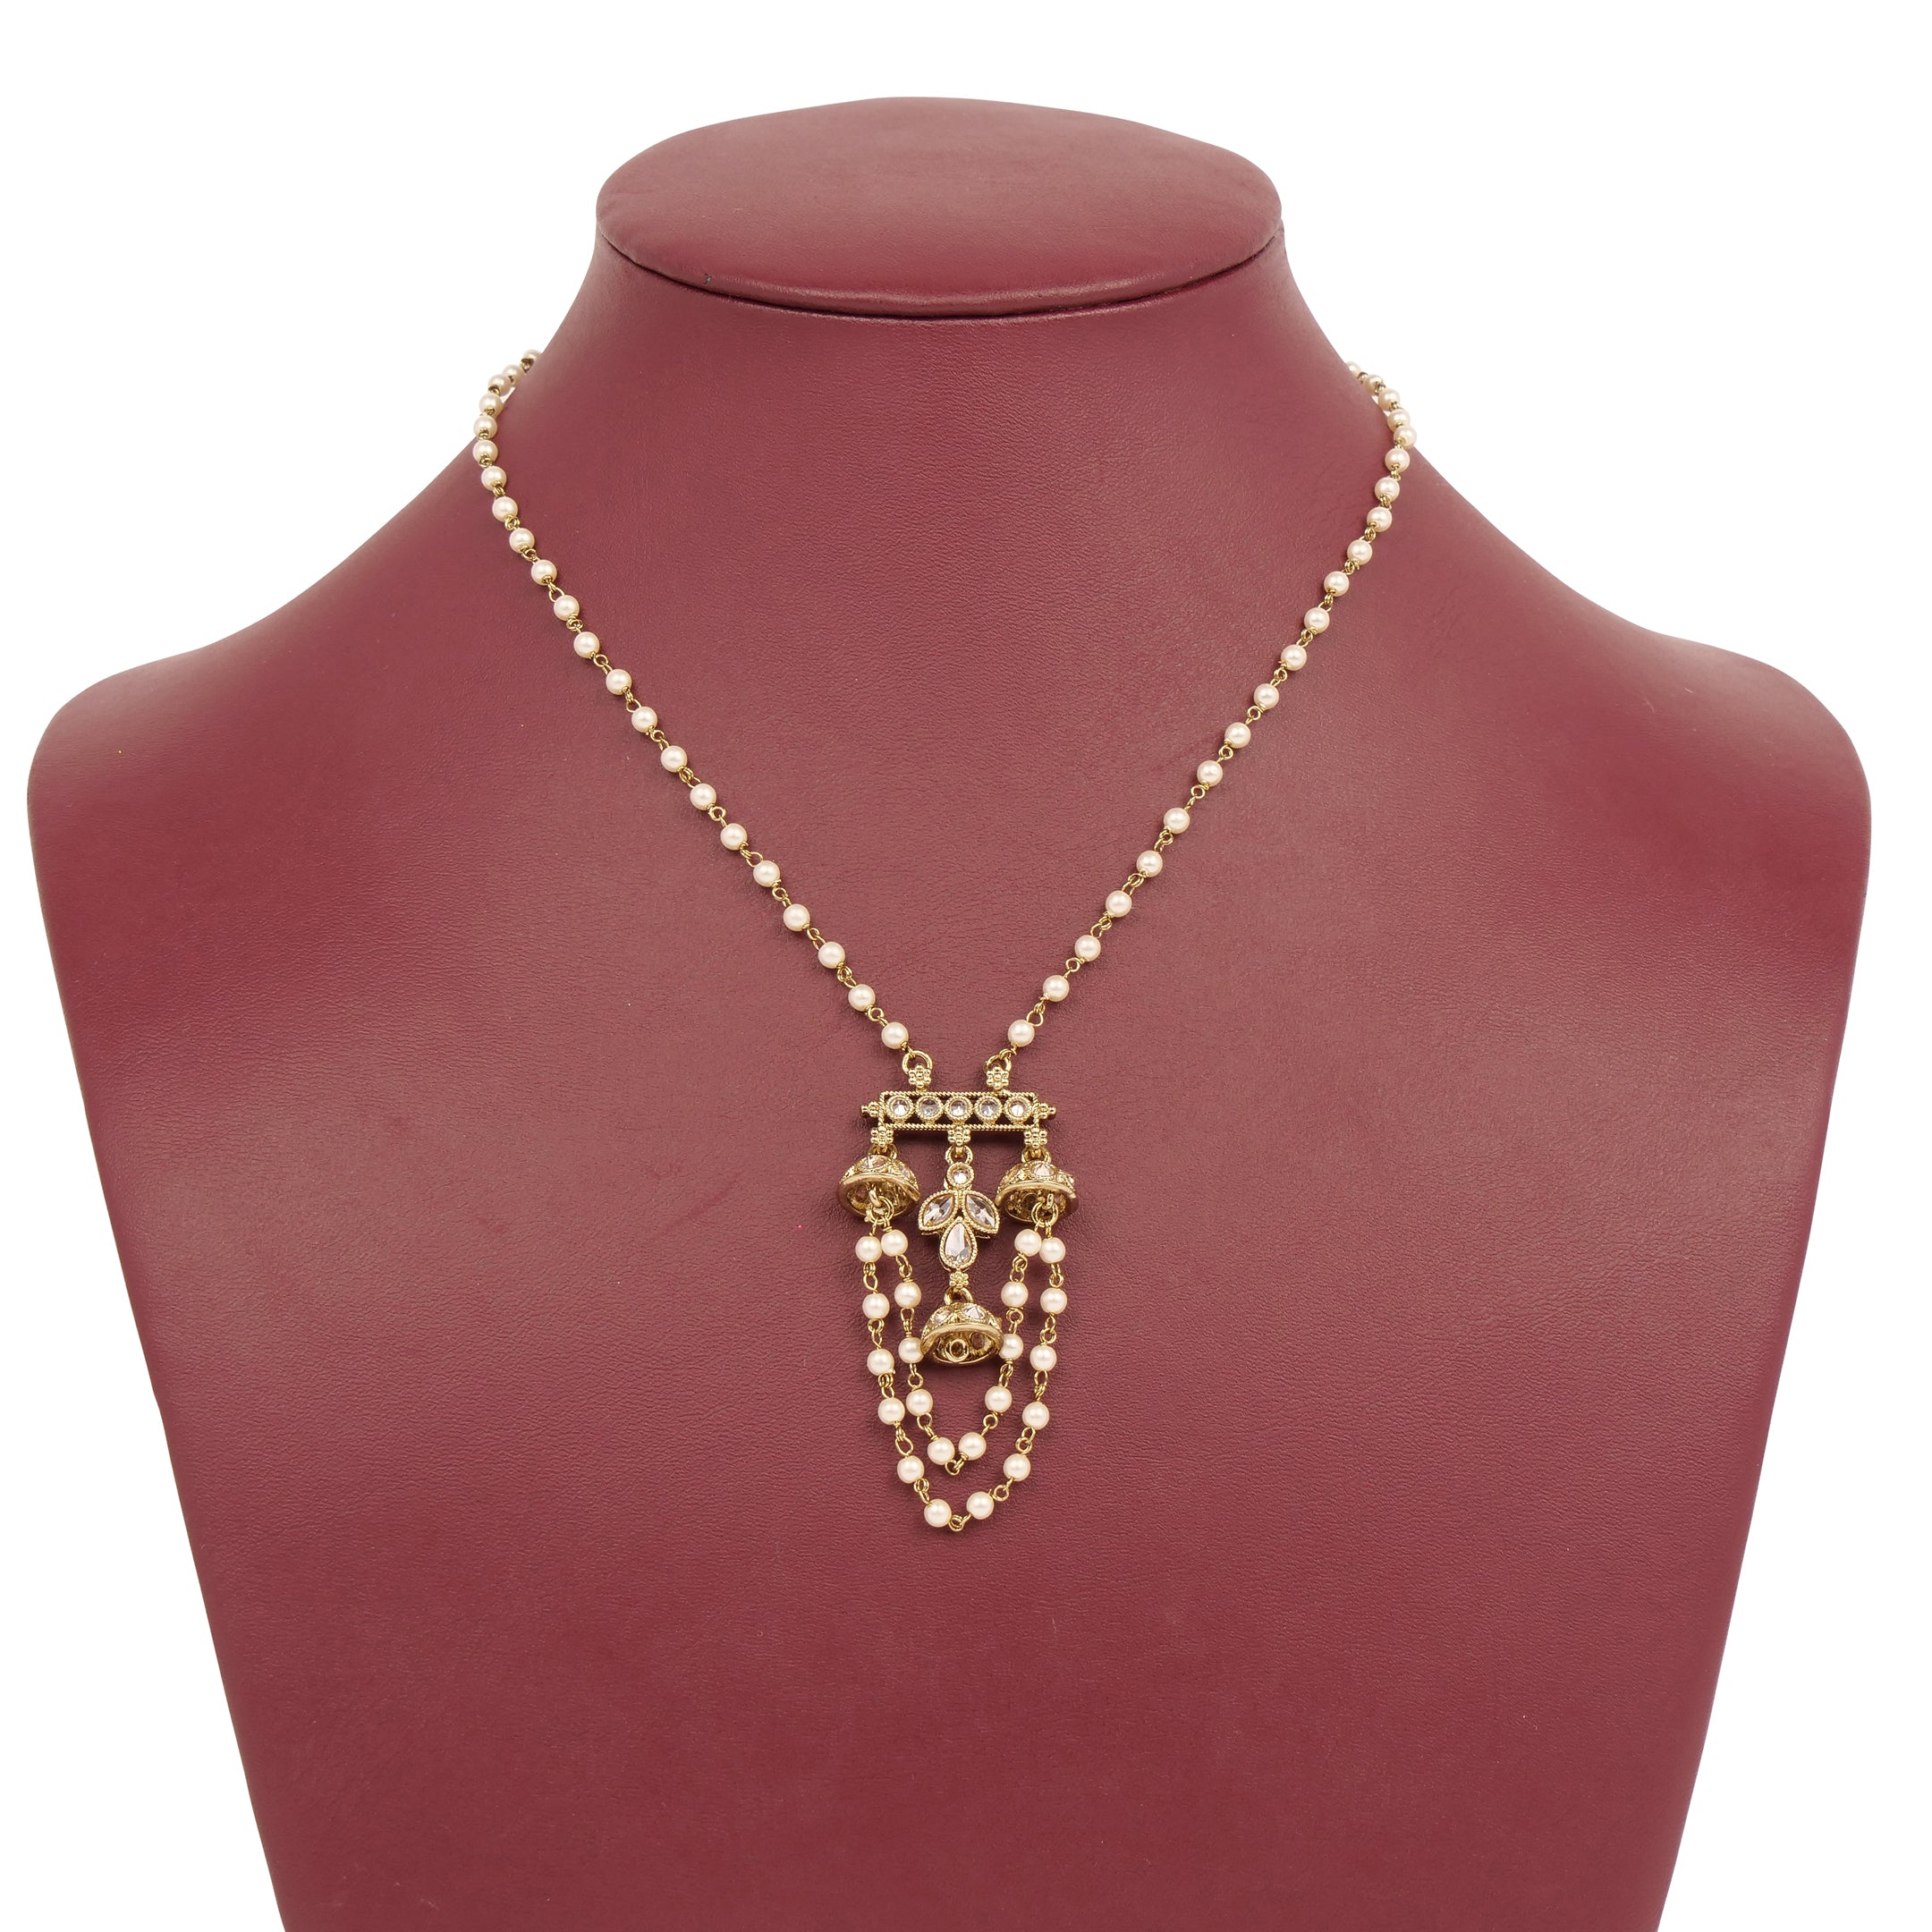 Noor Necklace in Pearl and Antique Gold